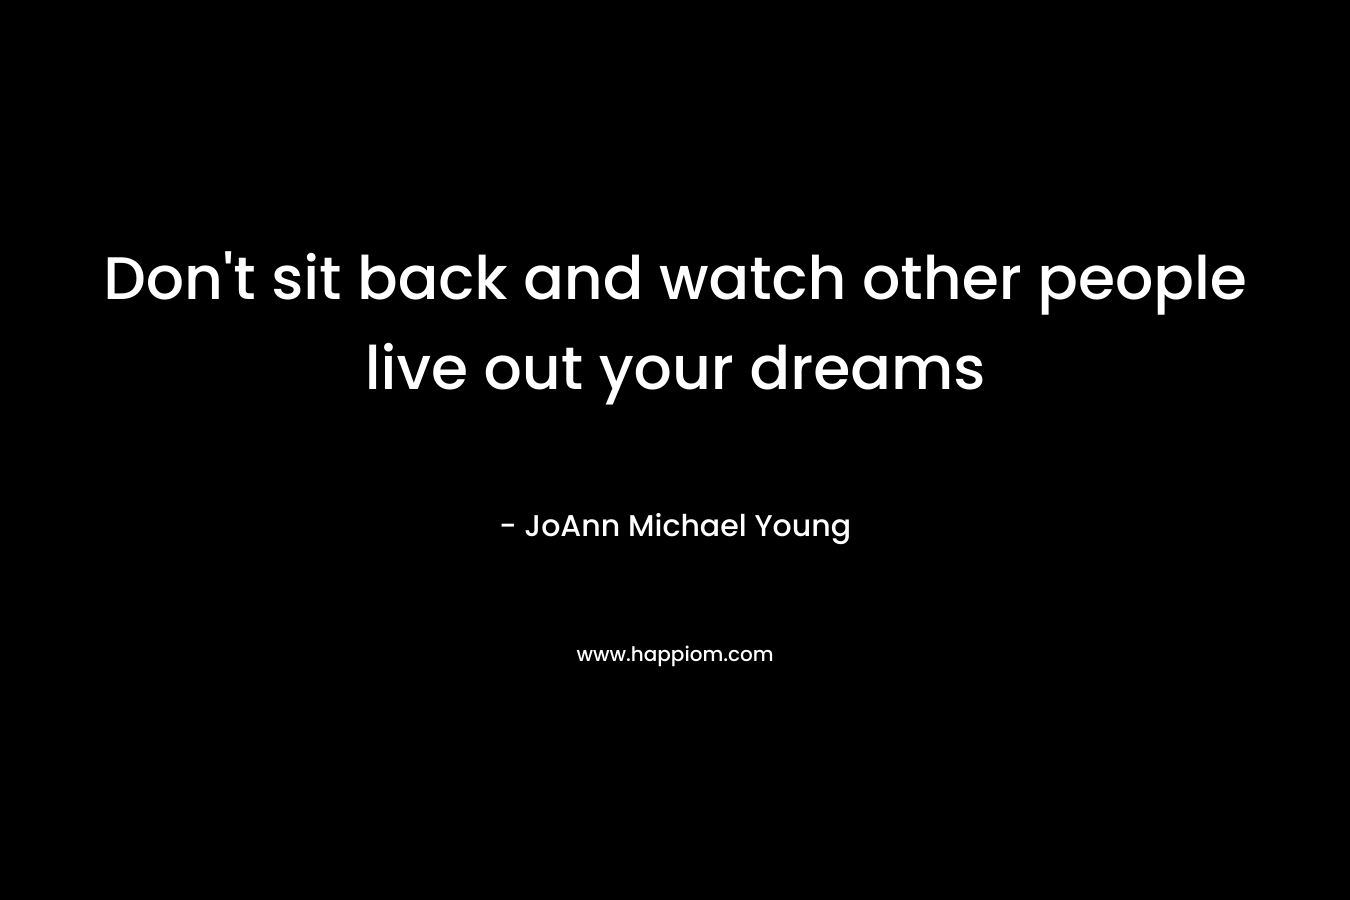 Don’t sit back and watch other people live out your dreams – JoAnn Michael Young